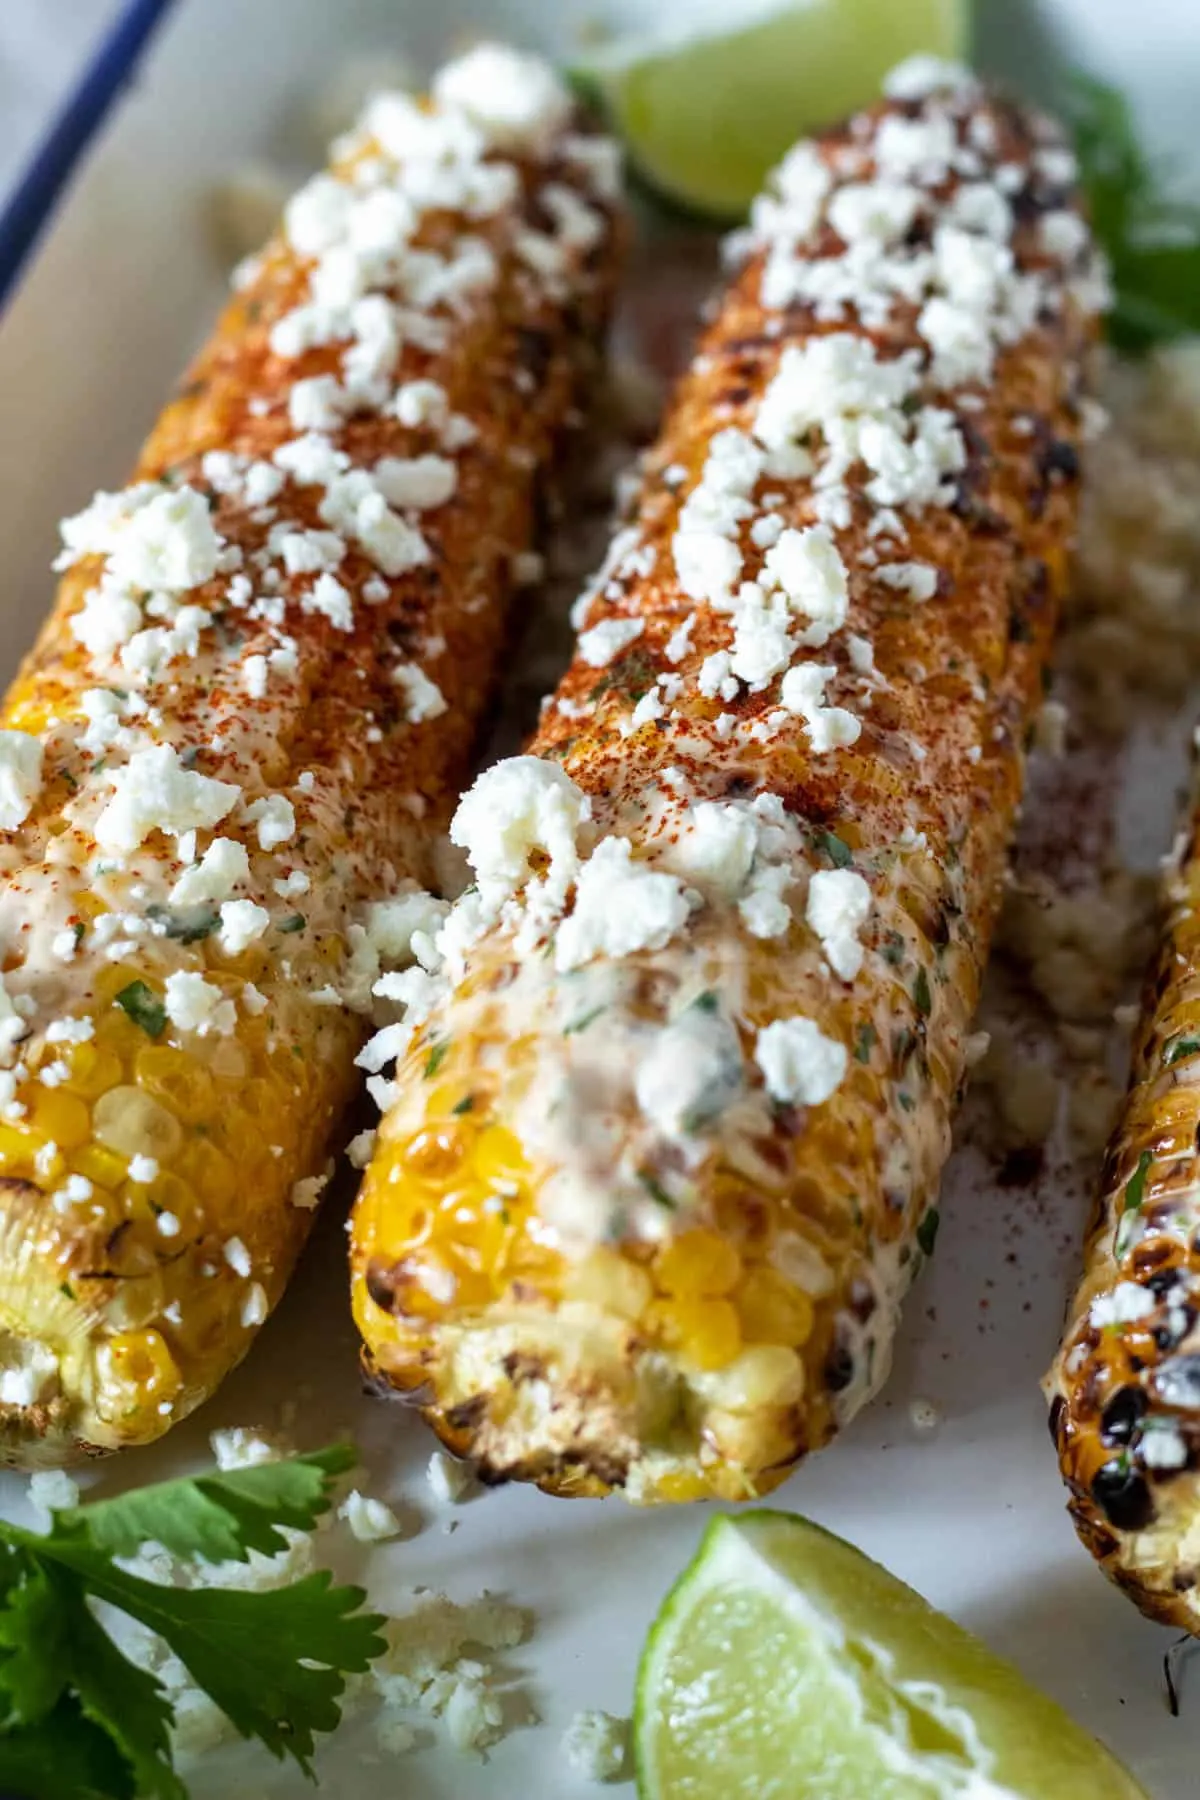 Close up of grilled Mexican street corn with crumbled cheese.